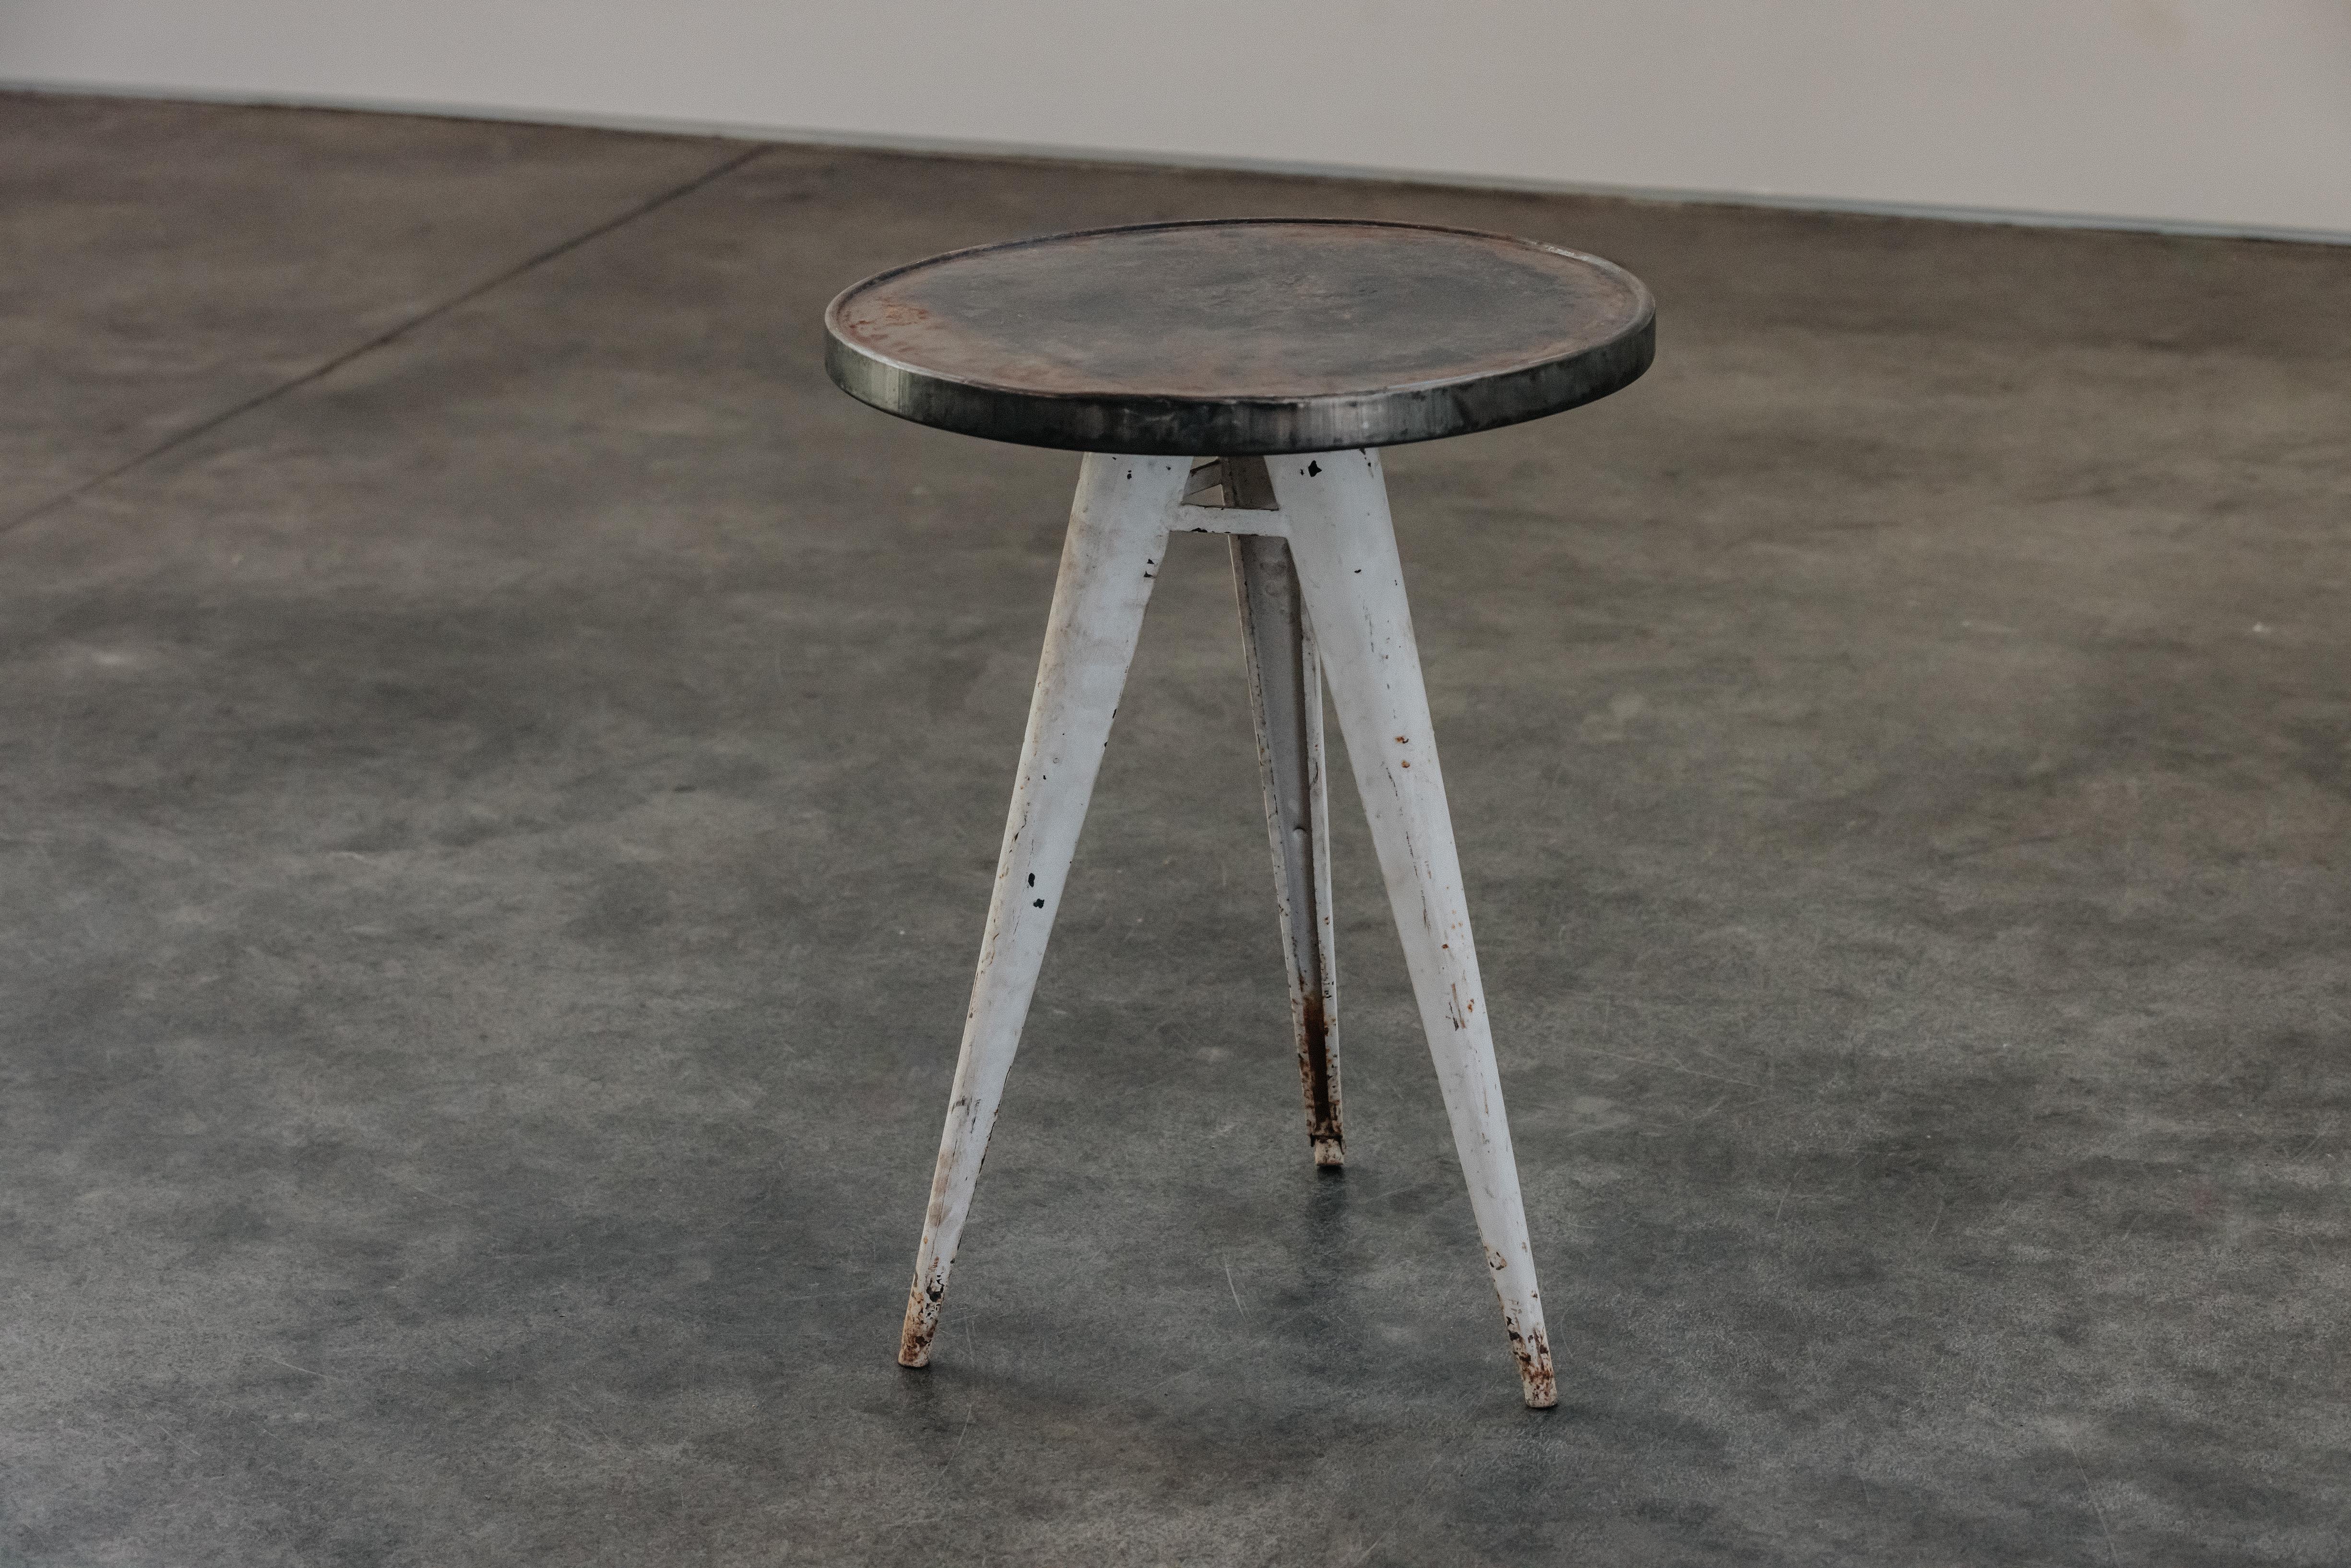 Vintage Metal Tolix Bistro Table From France, Circa 1950.  Original paint with great patina and use.